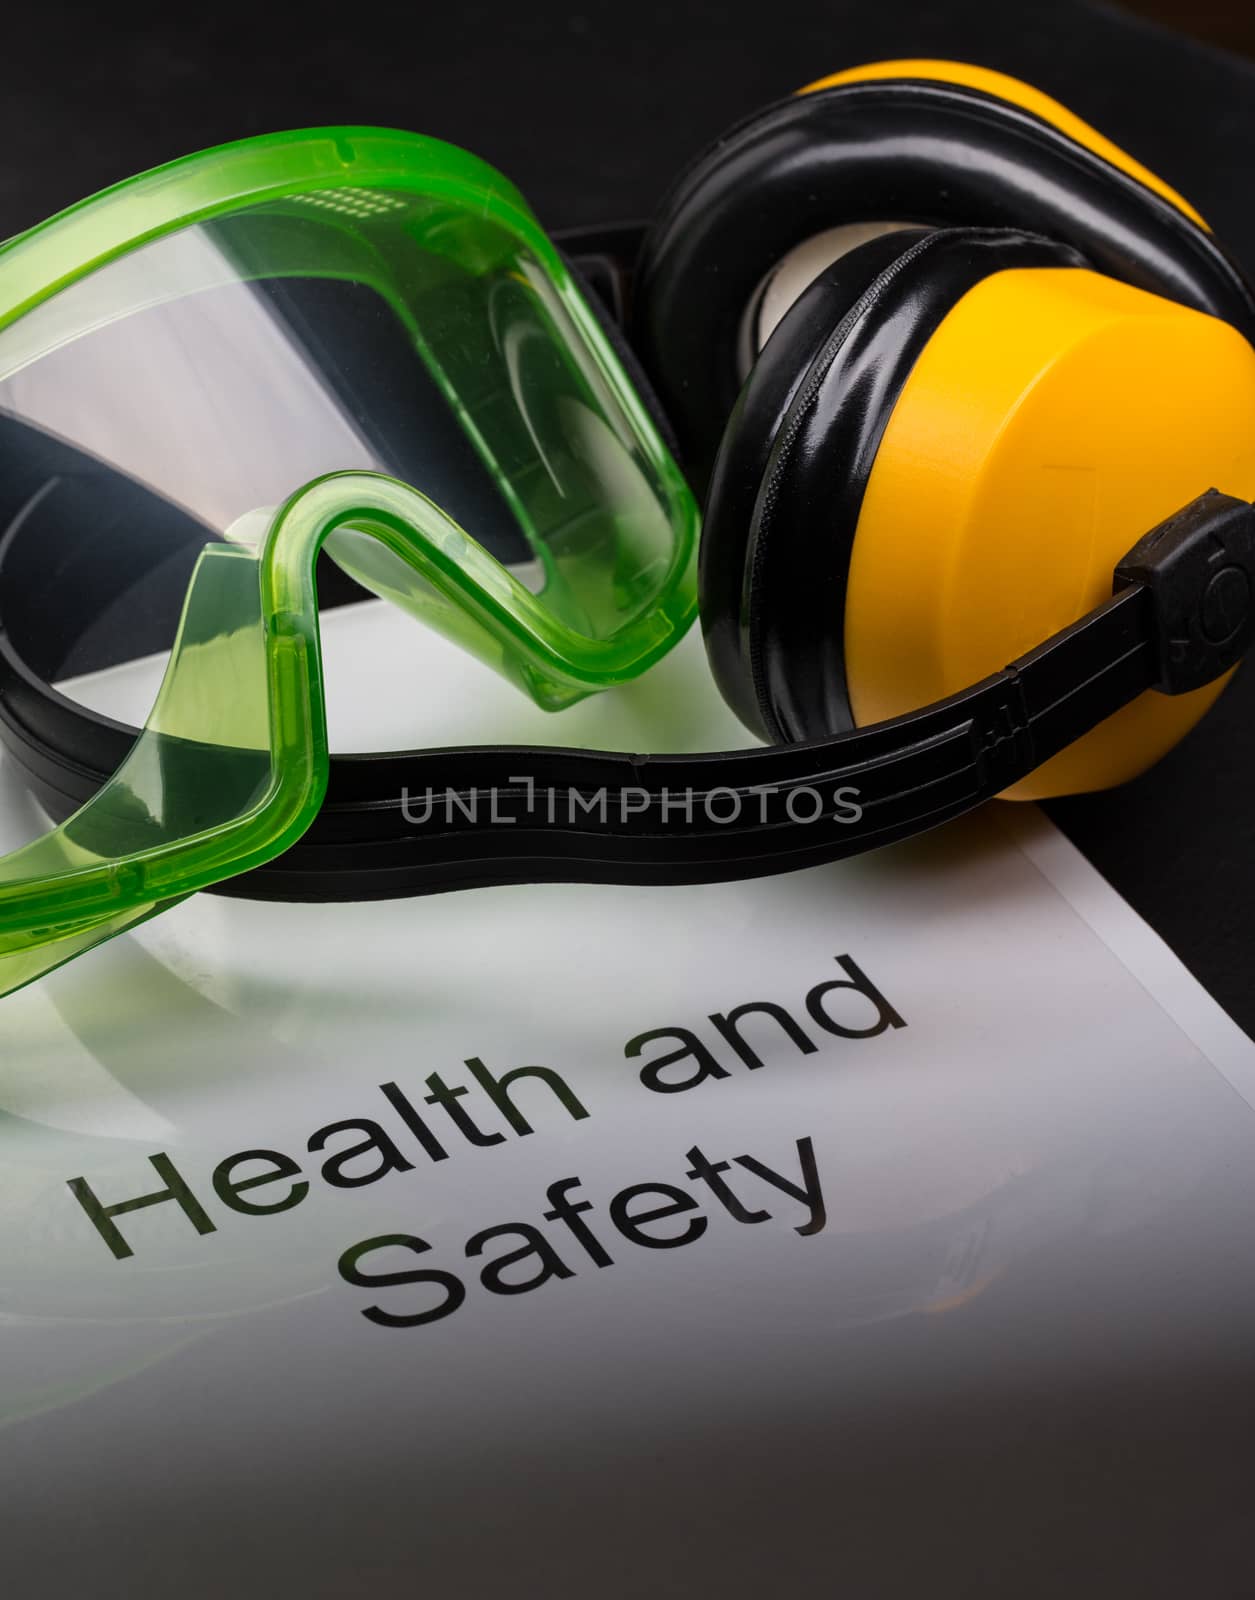 Health and safety register with goggles and earphones by Garsya